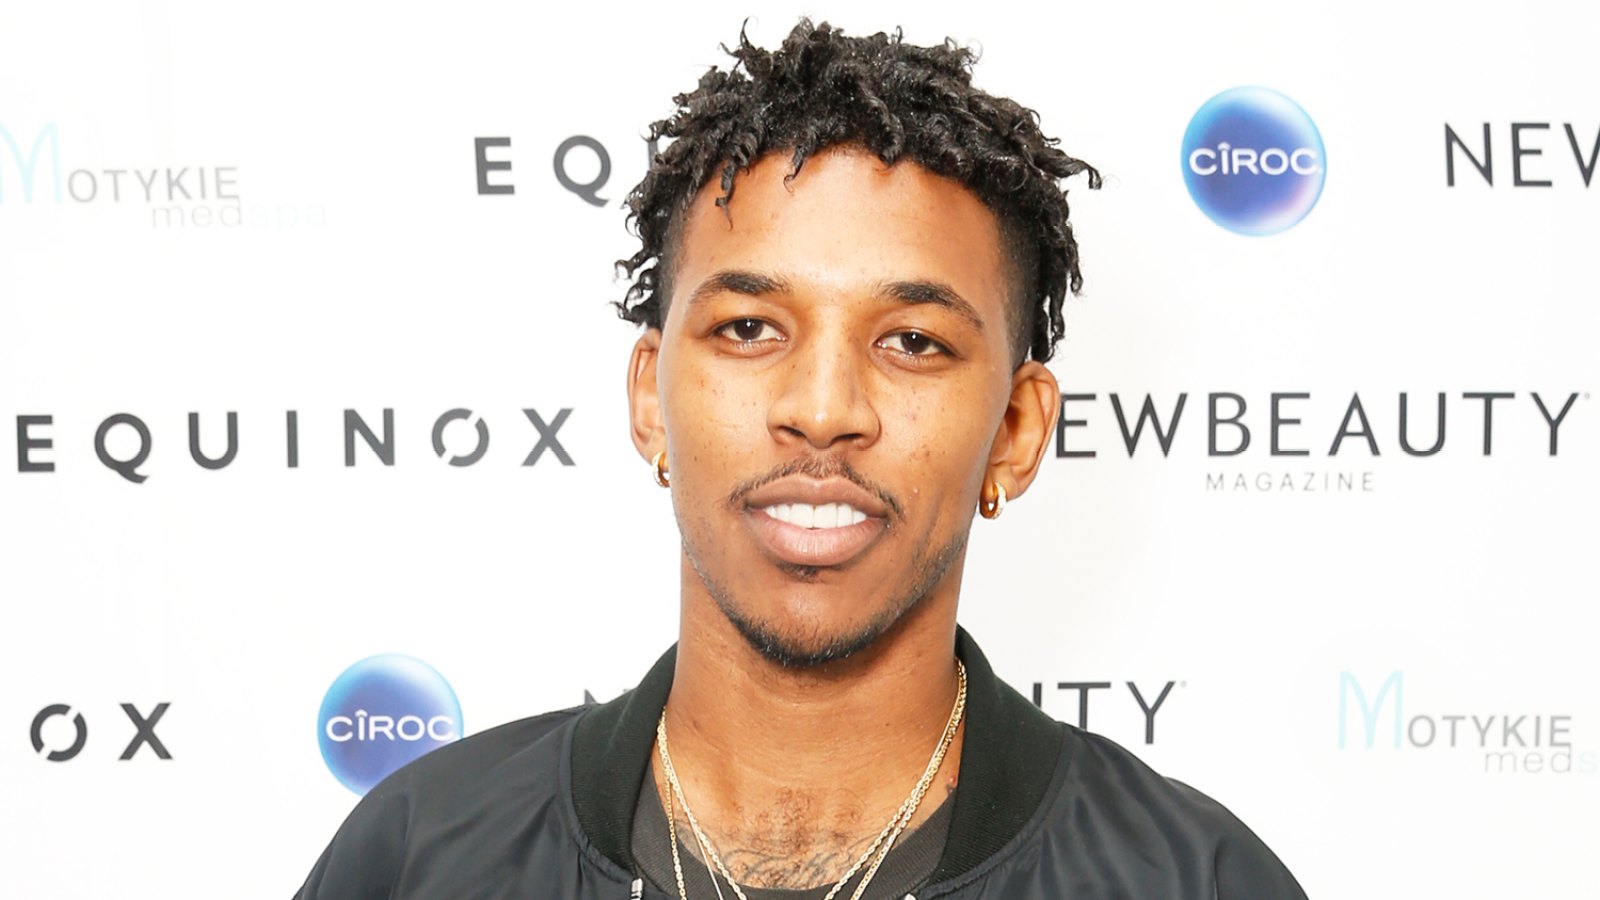 Nick Young arrives Fall Into Amazing Skin event on September 13, 2016 in West Hollywood, California.